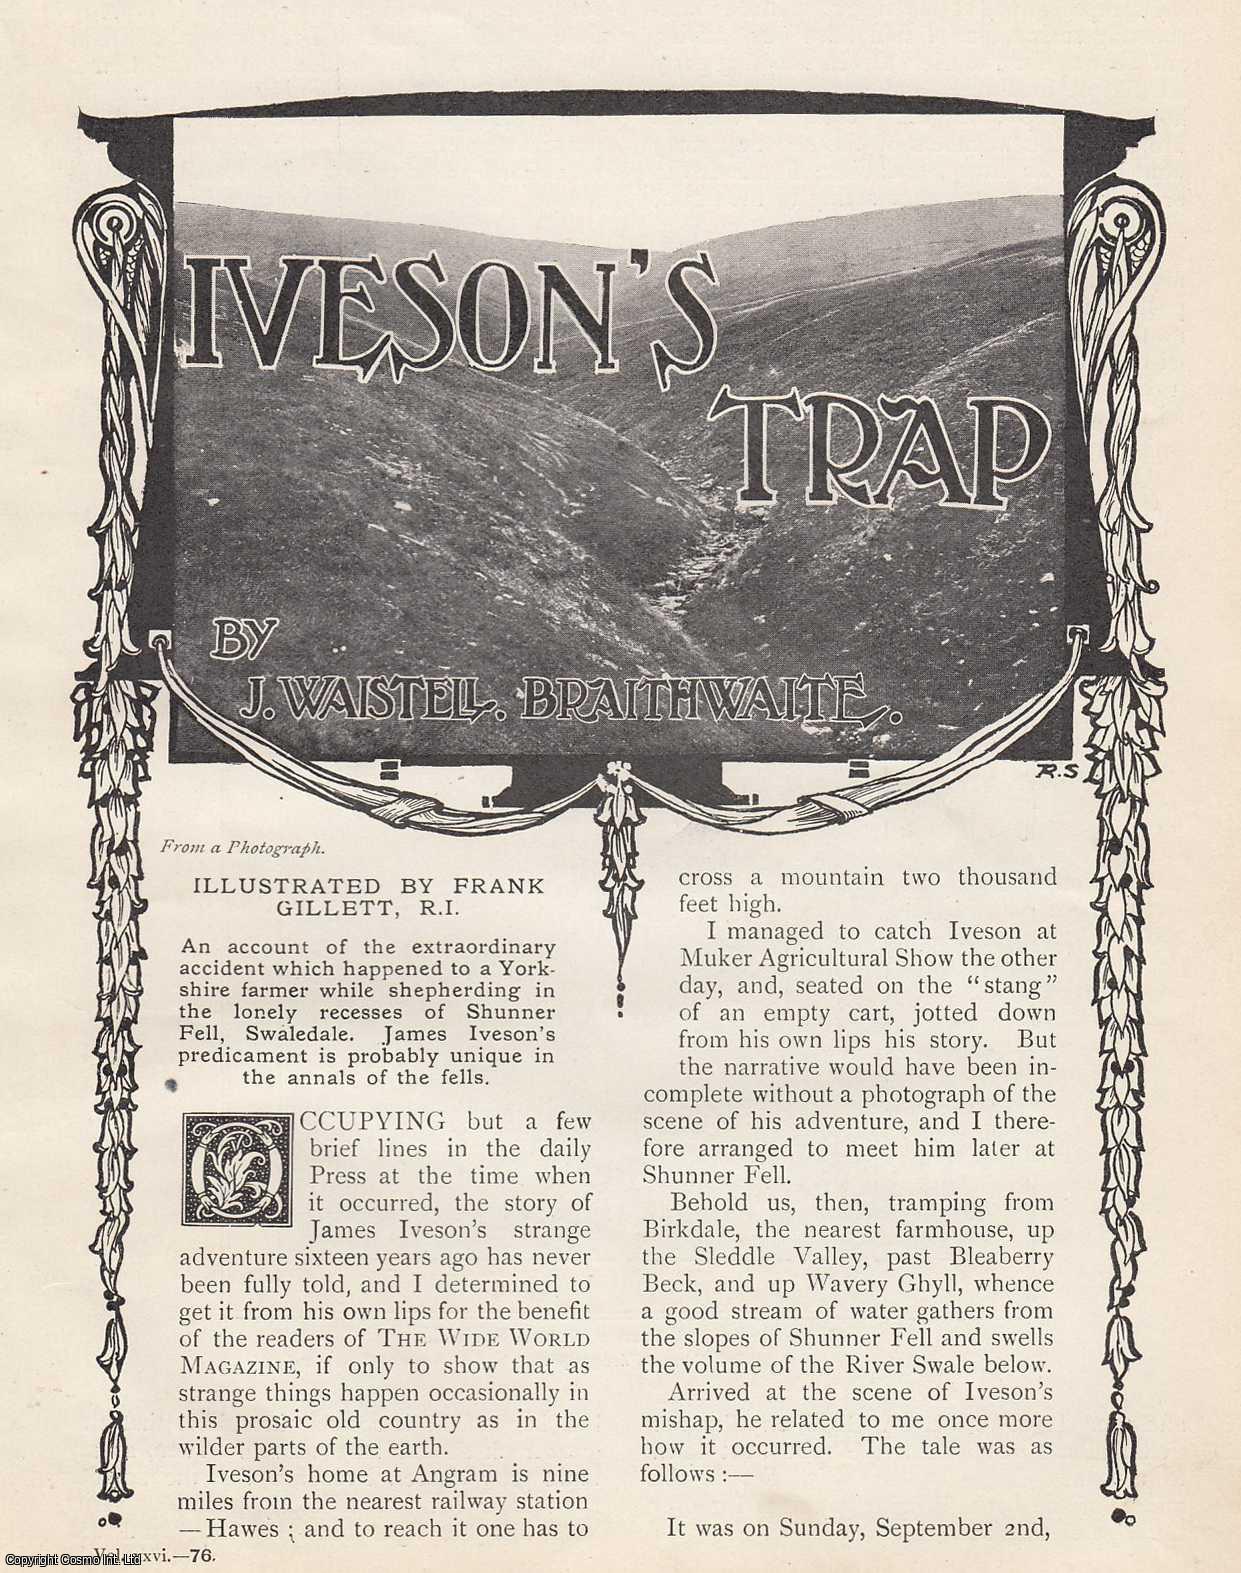 J. Waistel Braithwaite - Iveson's Trap. Shepherding in the Shunner Fell, Swaledale. 1911. This is an original article from the Wide World Magazine.